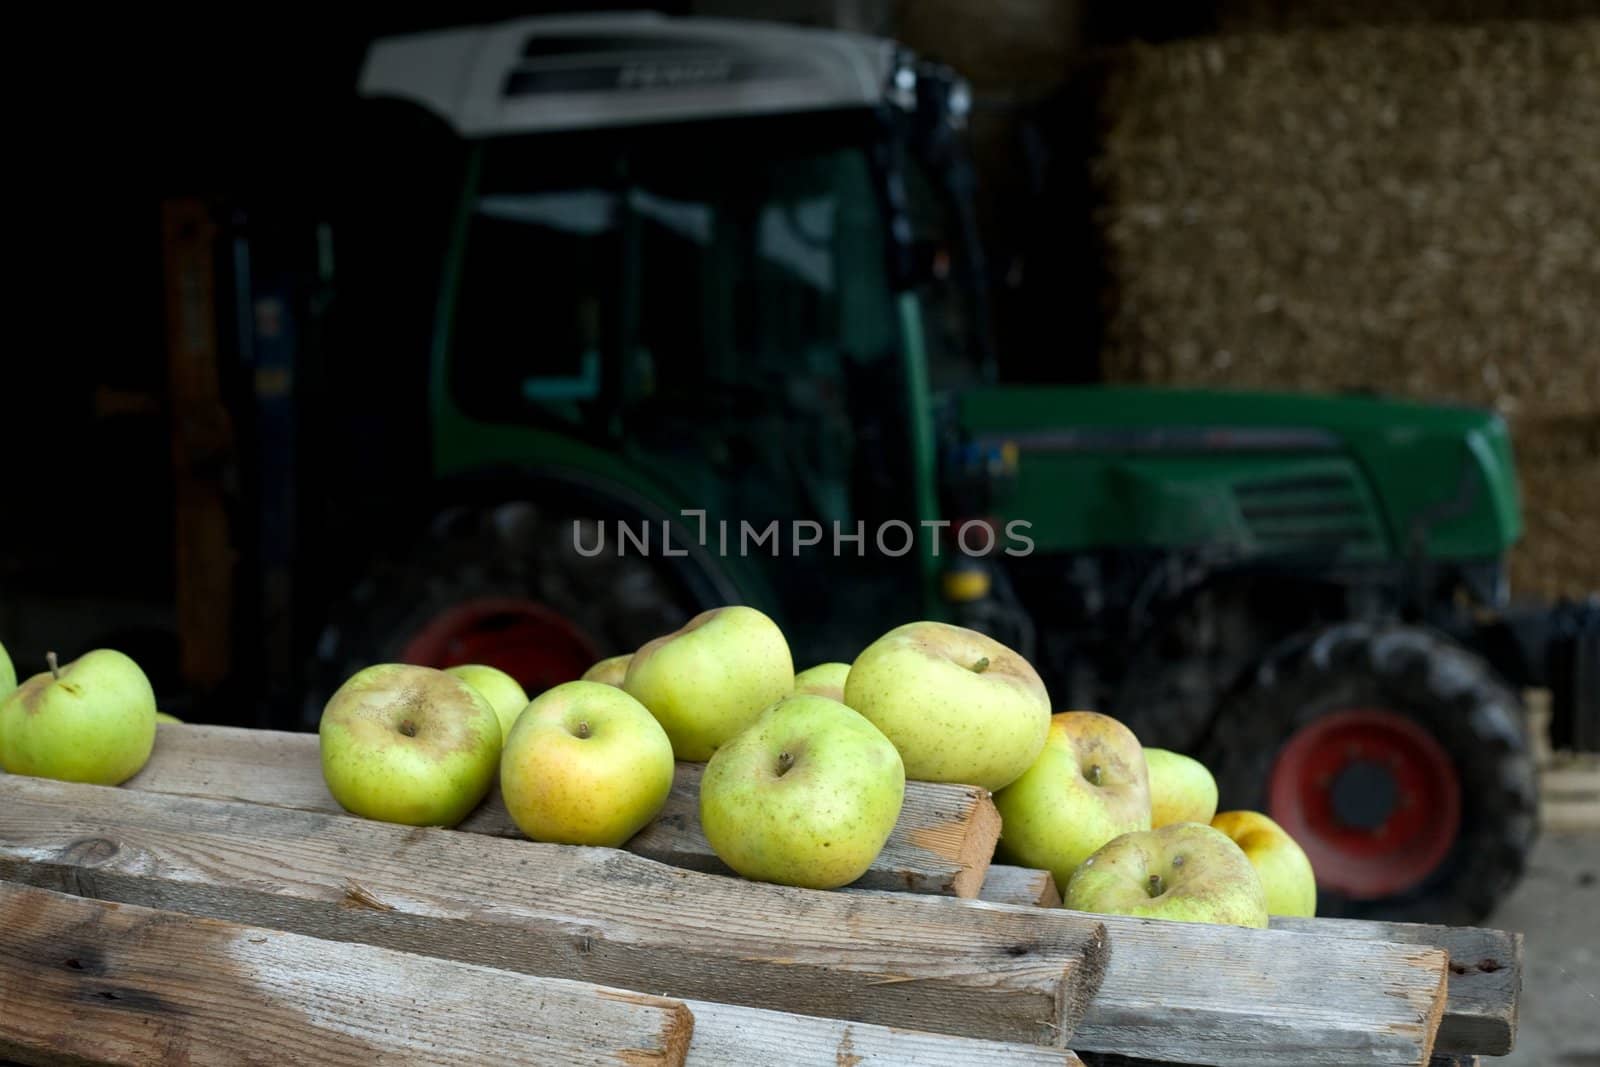 An image of green apples on planks